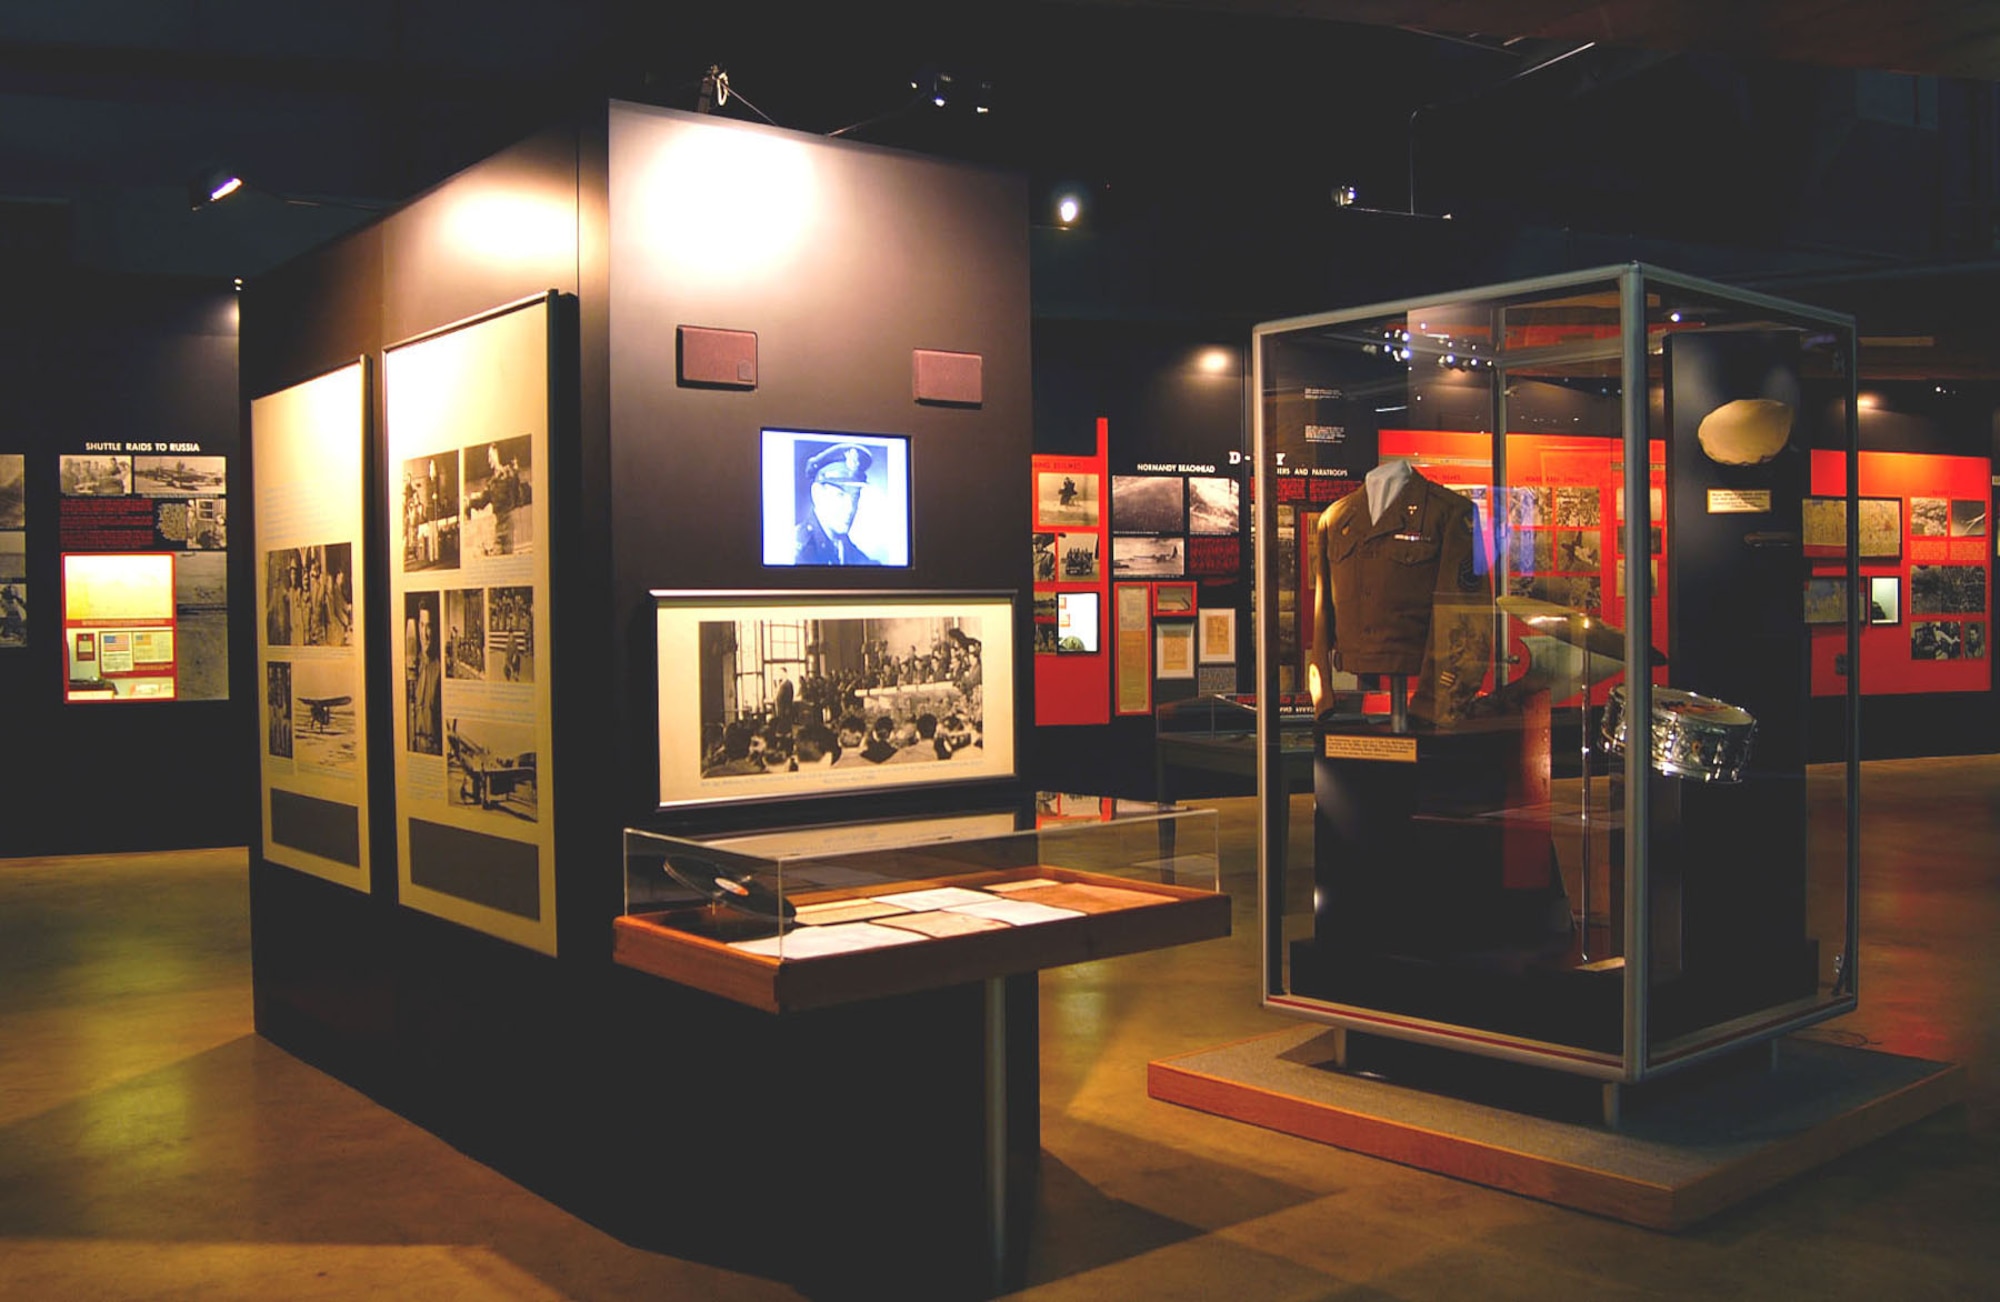 DAYTON, Ohio -- Maj. Glenn Miller exhibit in the World War II Gallery at the National Museum of the United States Air Force. (U.S. Air Force photo)